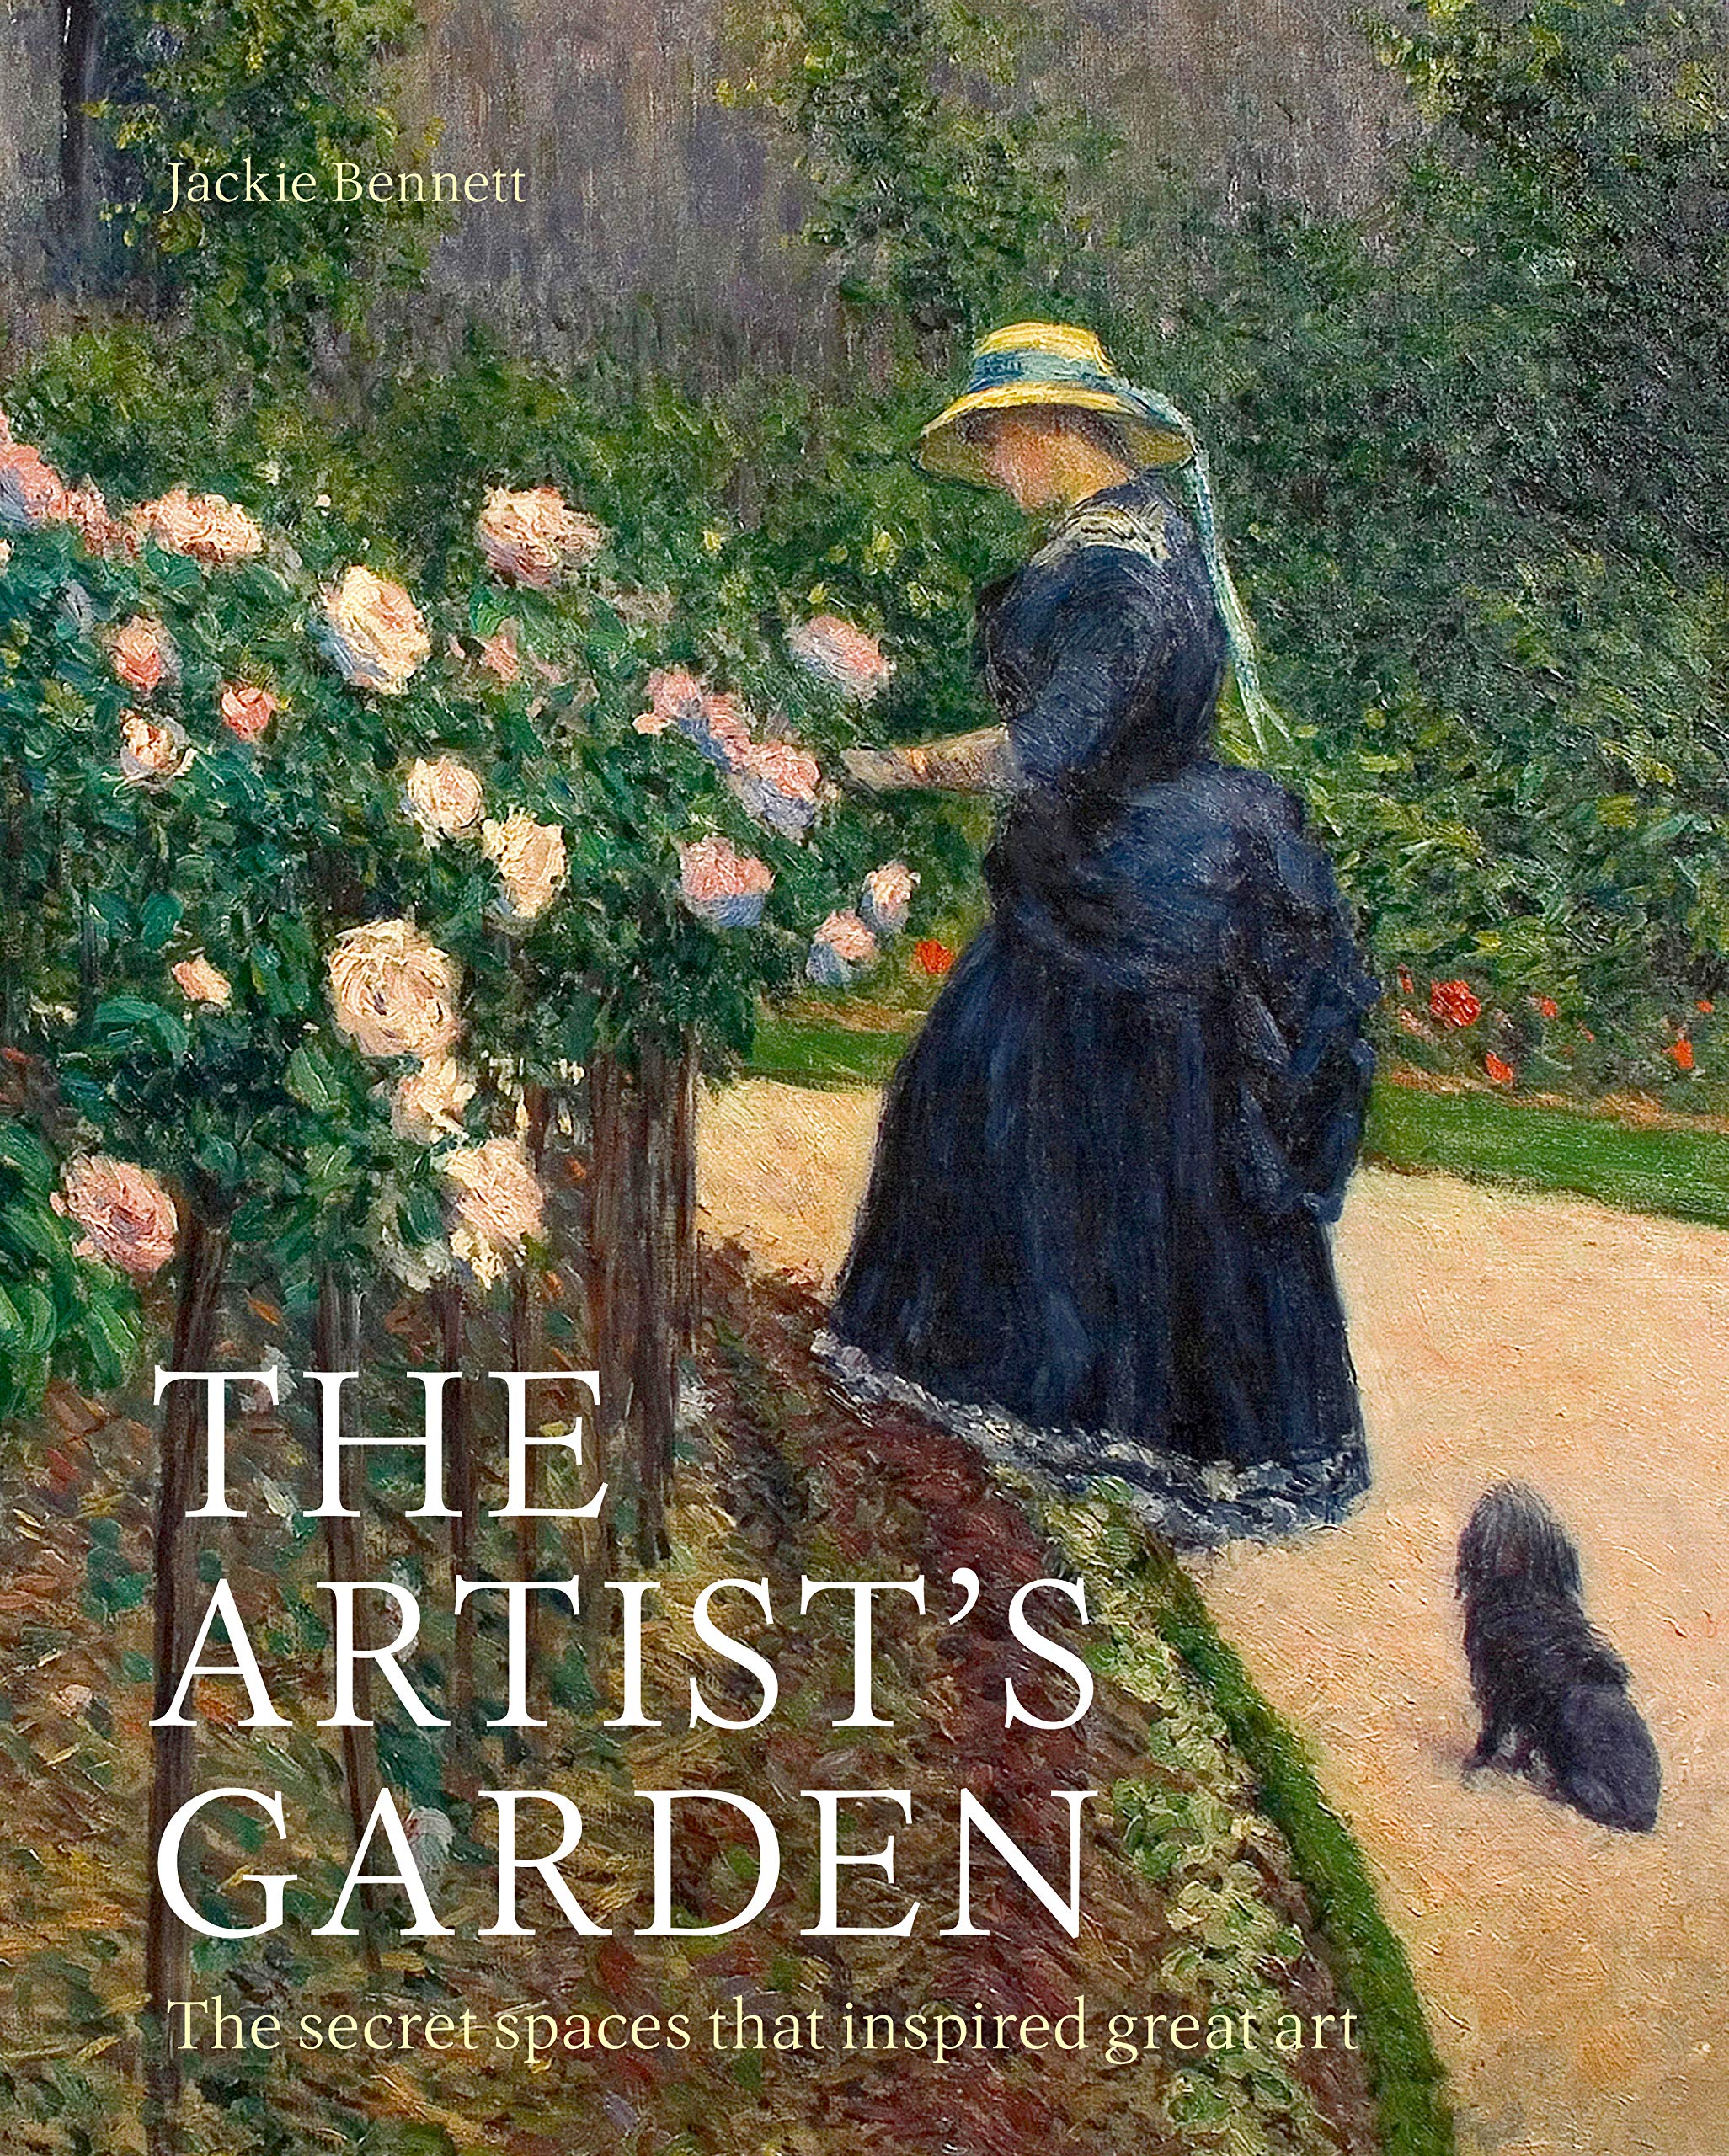 The Artist's Garden: The Secret Spaces that Inspired Great Art